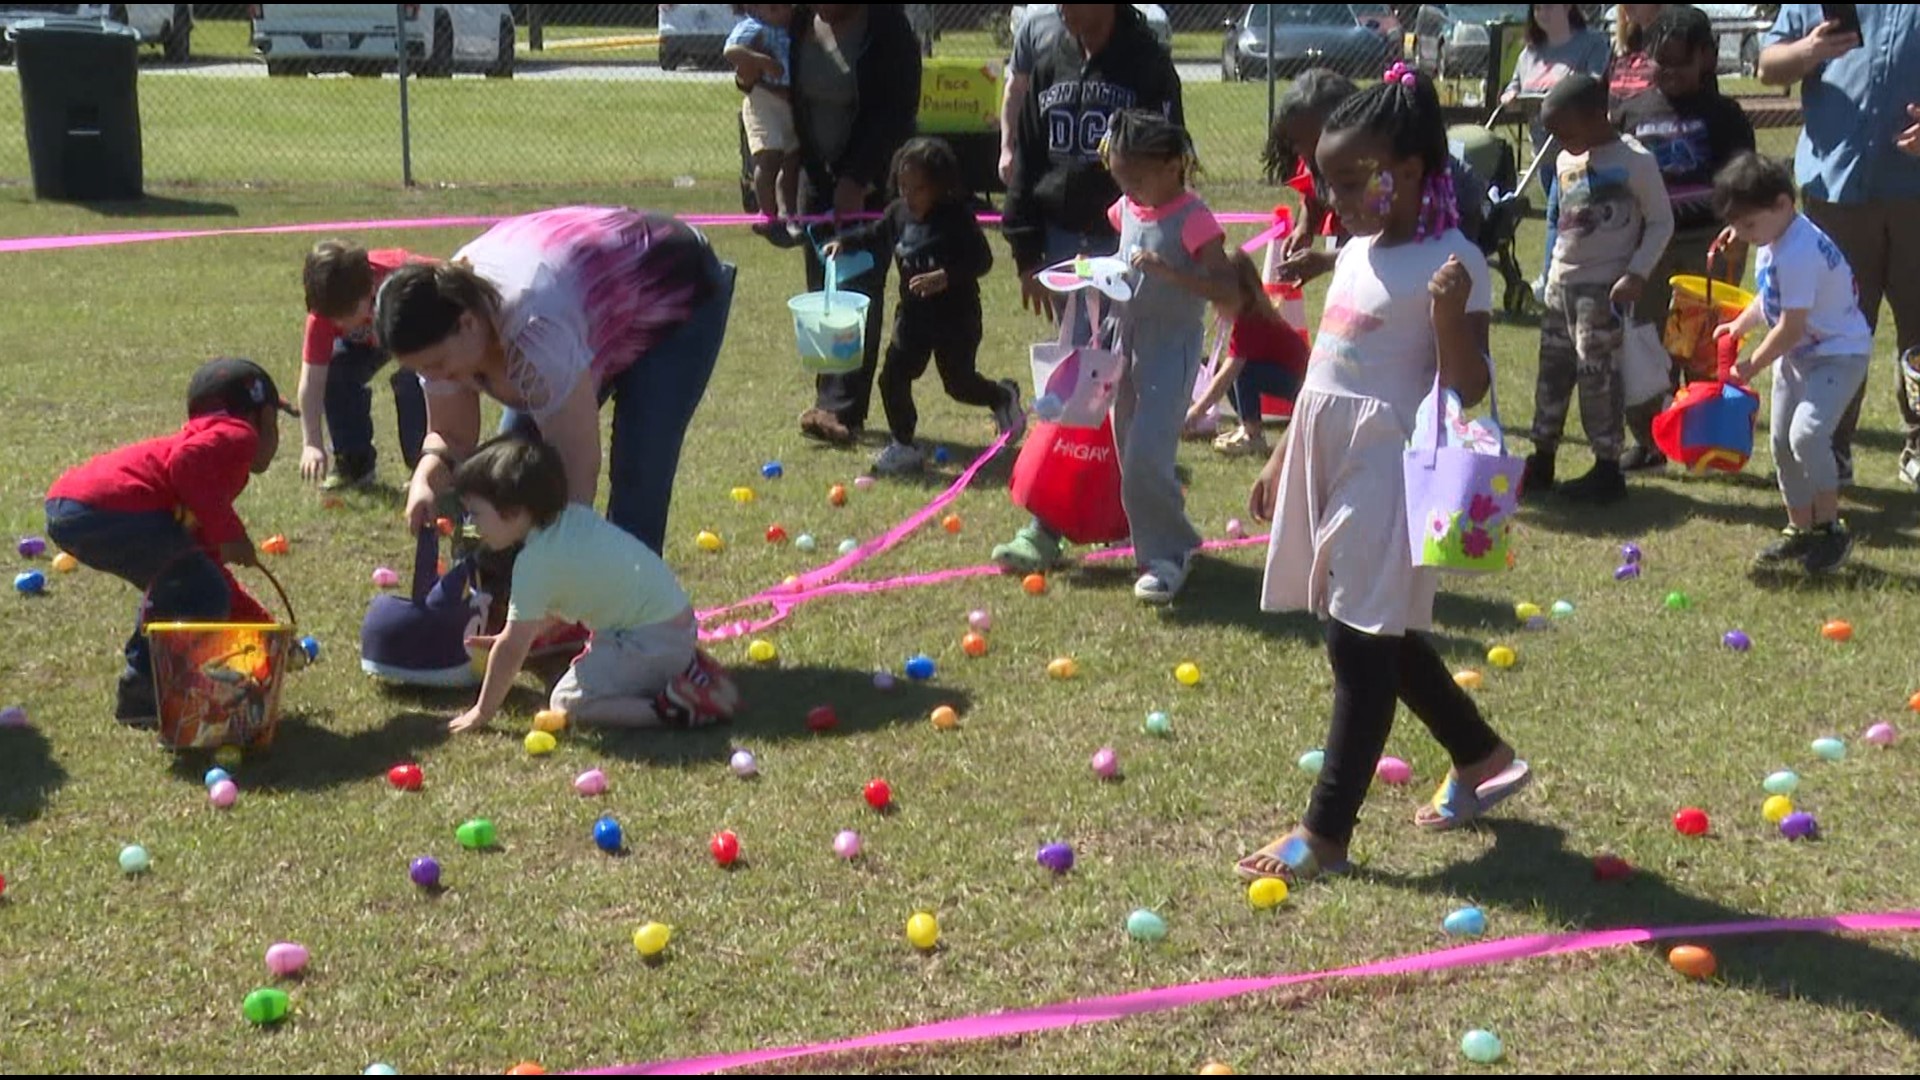 There were egg hunt zones designed for special needs children, like beeping eggs for the visually impaired.